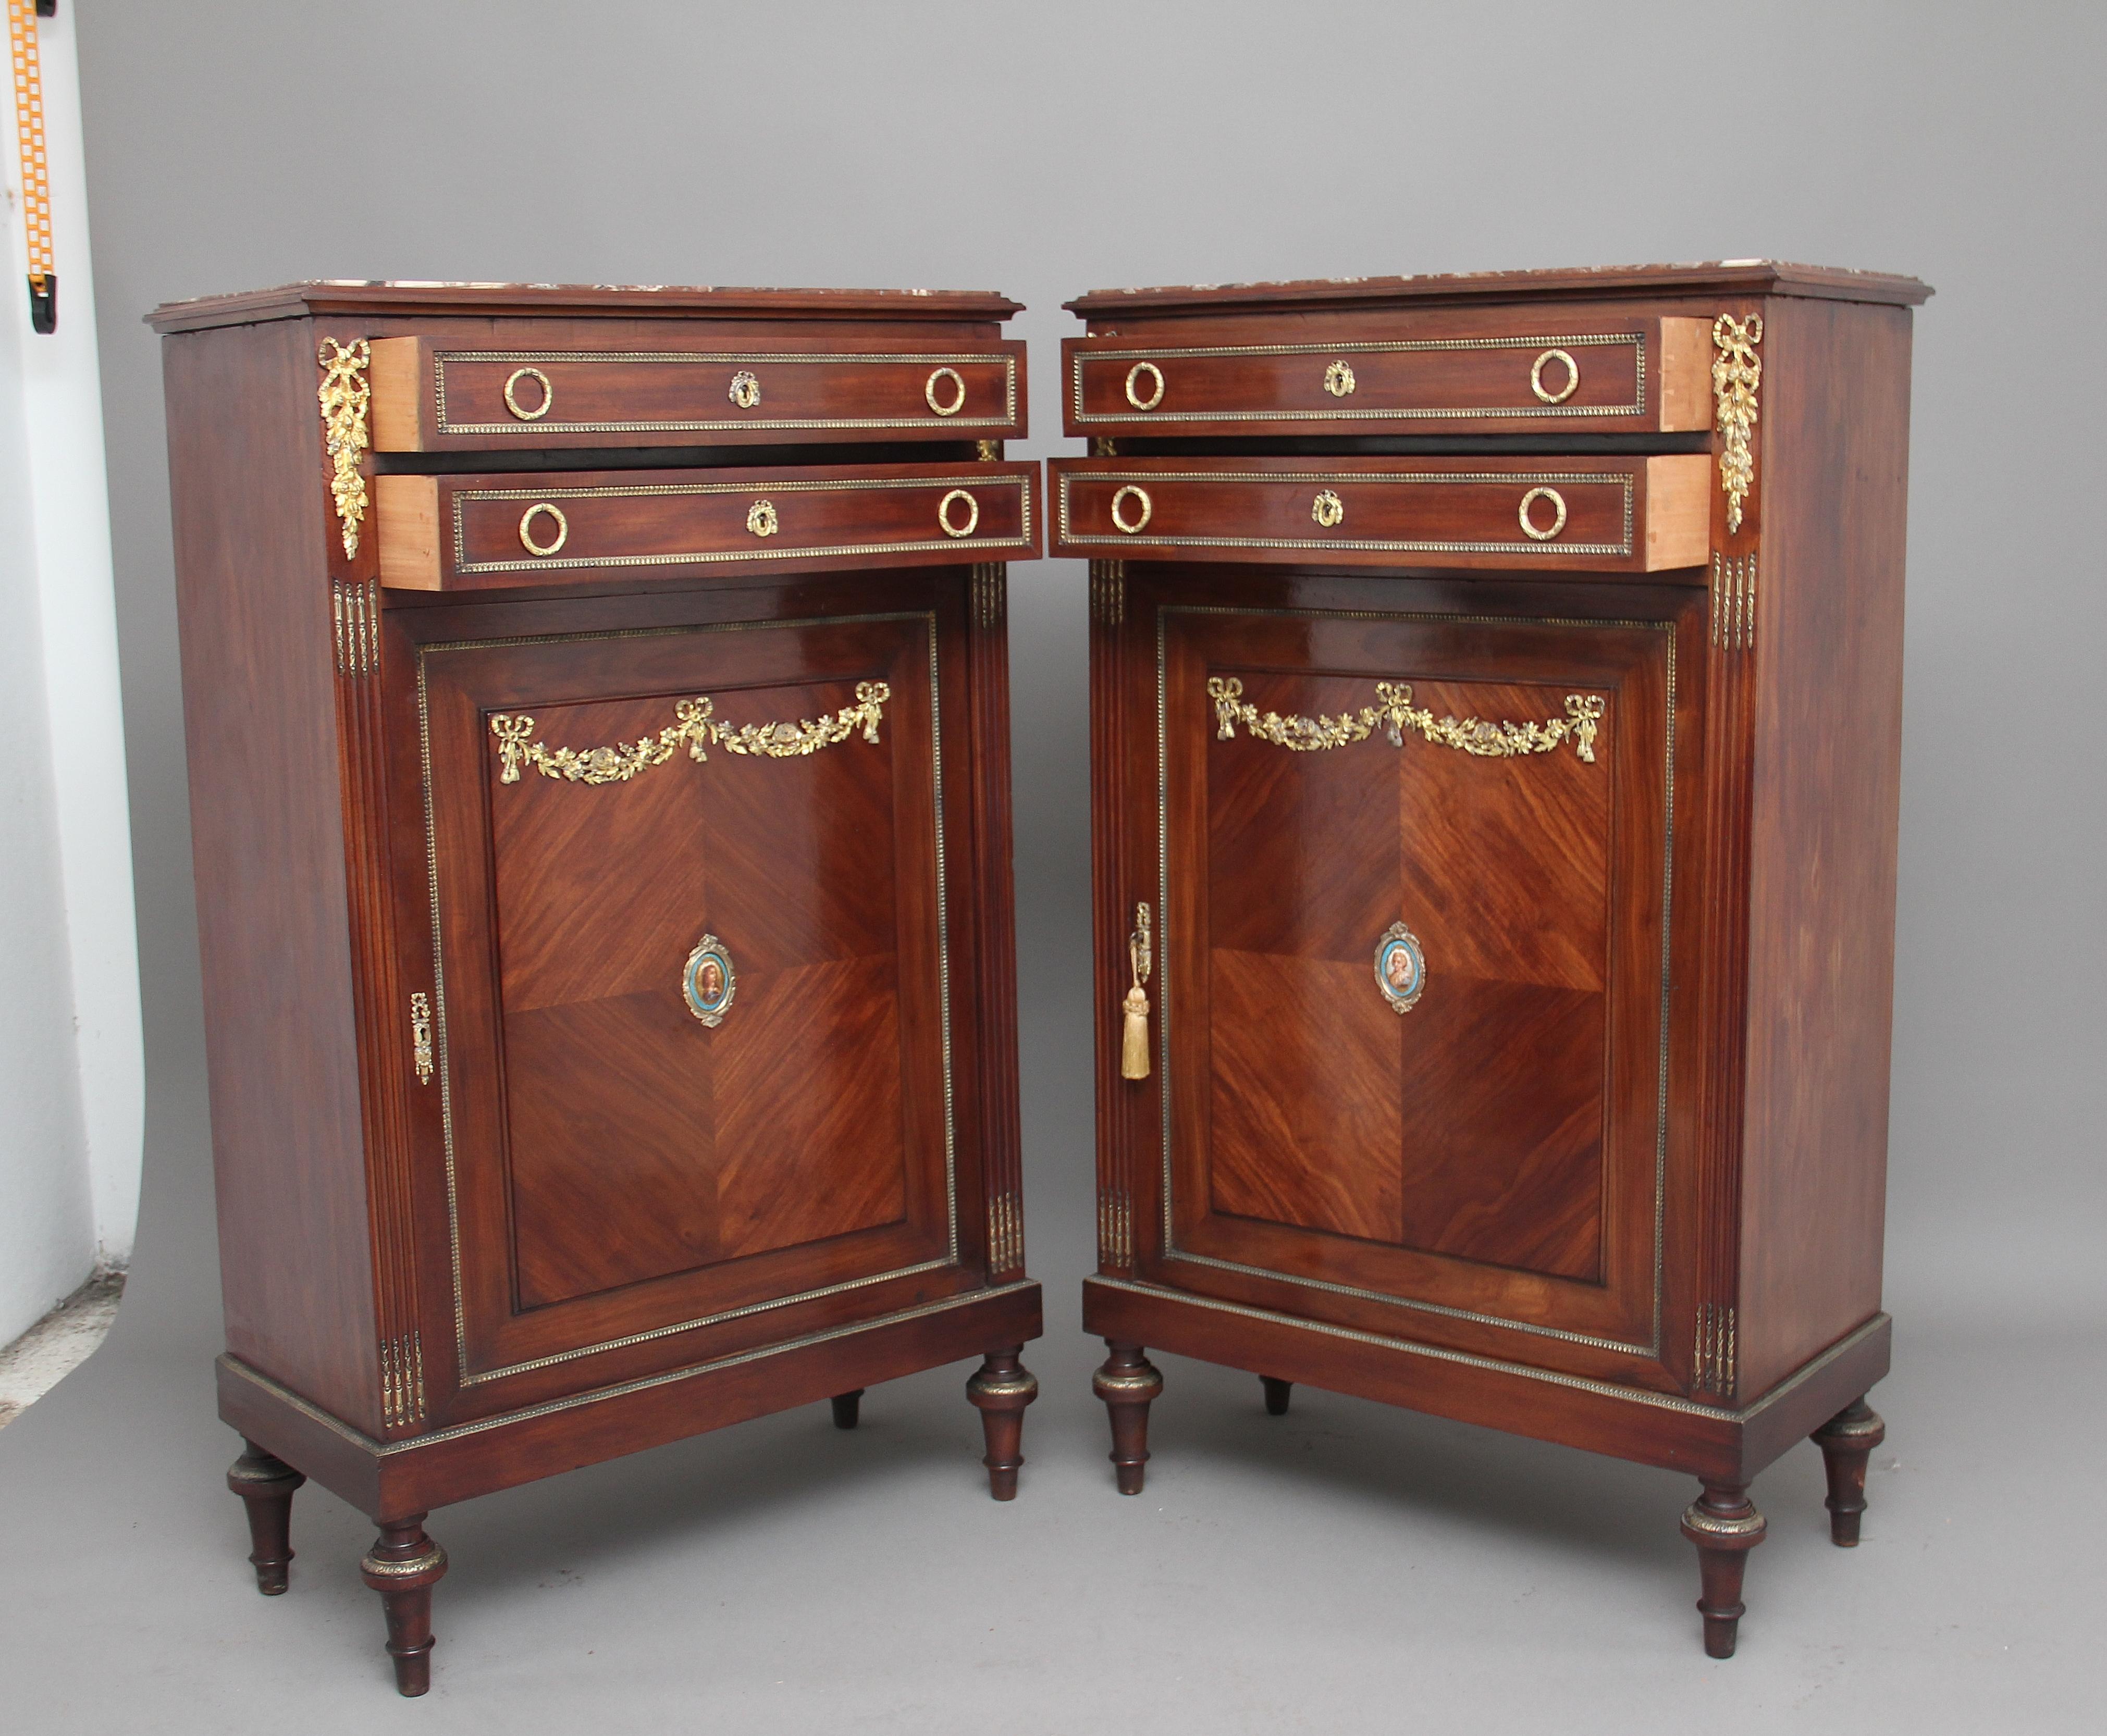 A pair of mid-19th century French mahogany side cabinets with ormolu mounts and mouldings, the tops having a nice moulded edge inset with rouge marble, each cabinet having two mahogany lined drawers with original brass ring handles and escutcheons,